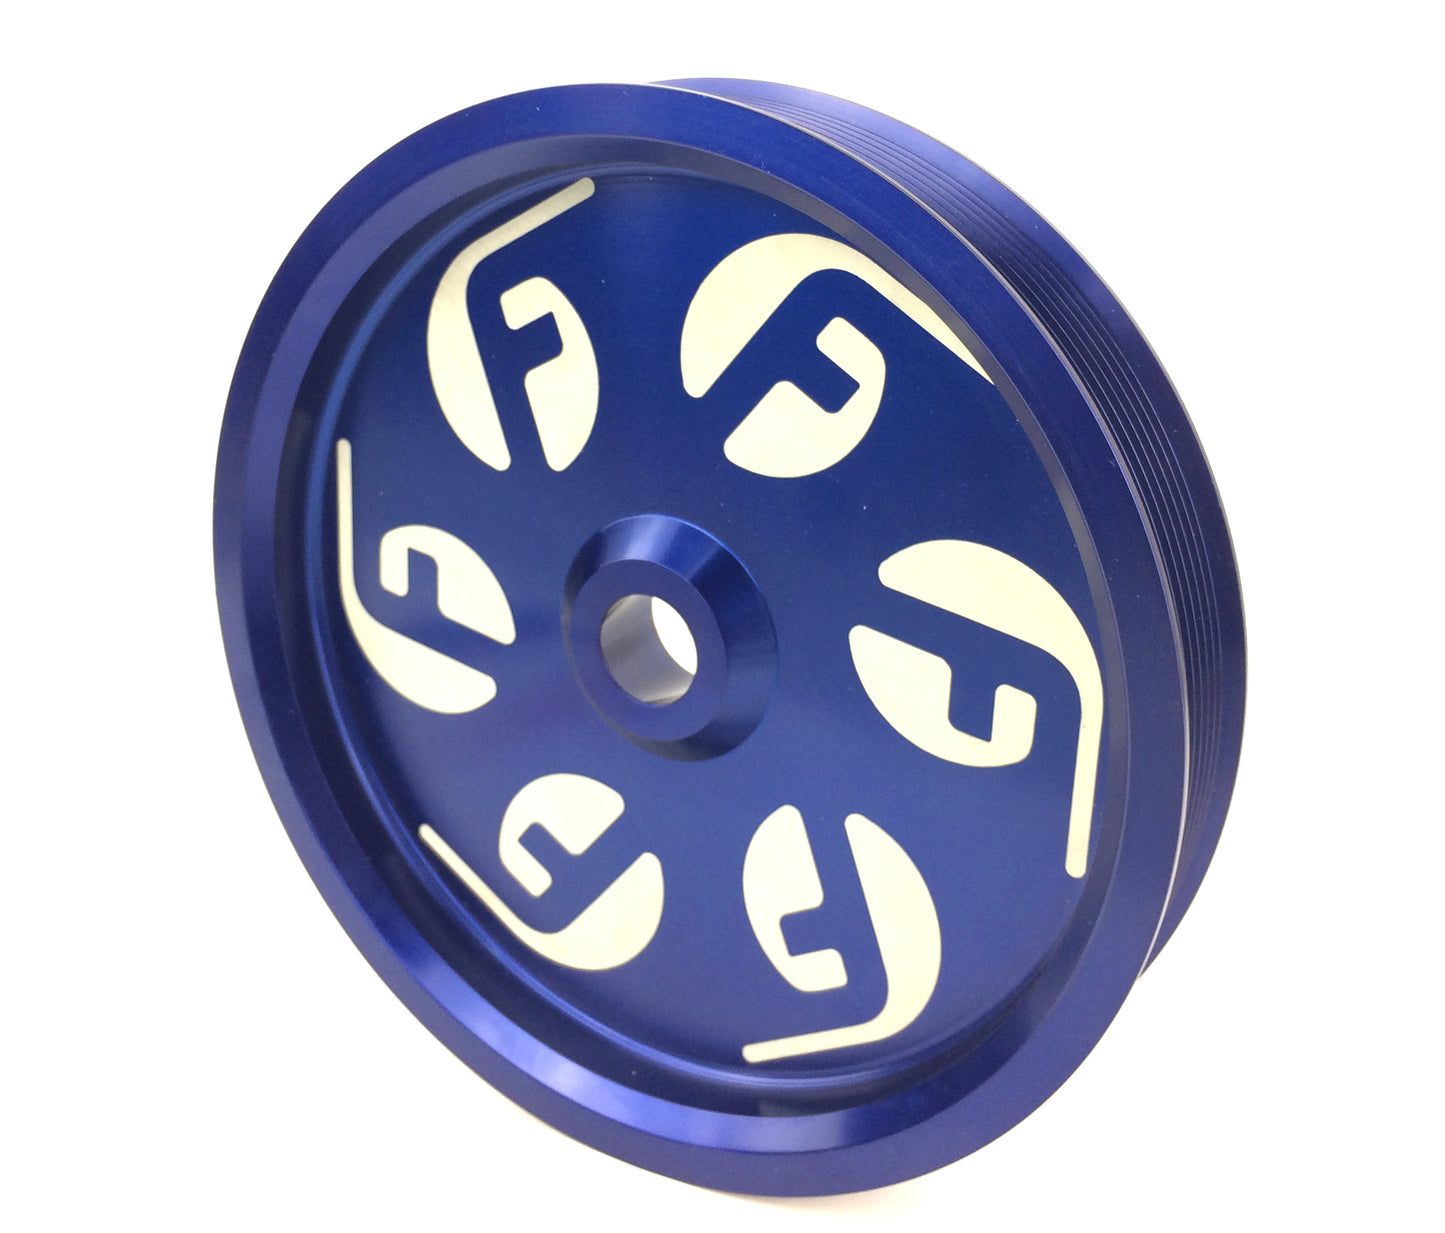 Cummins Dual Pump Pulley (for use with FPE dual pump bracket) Blue